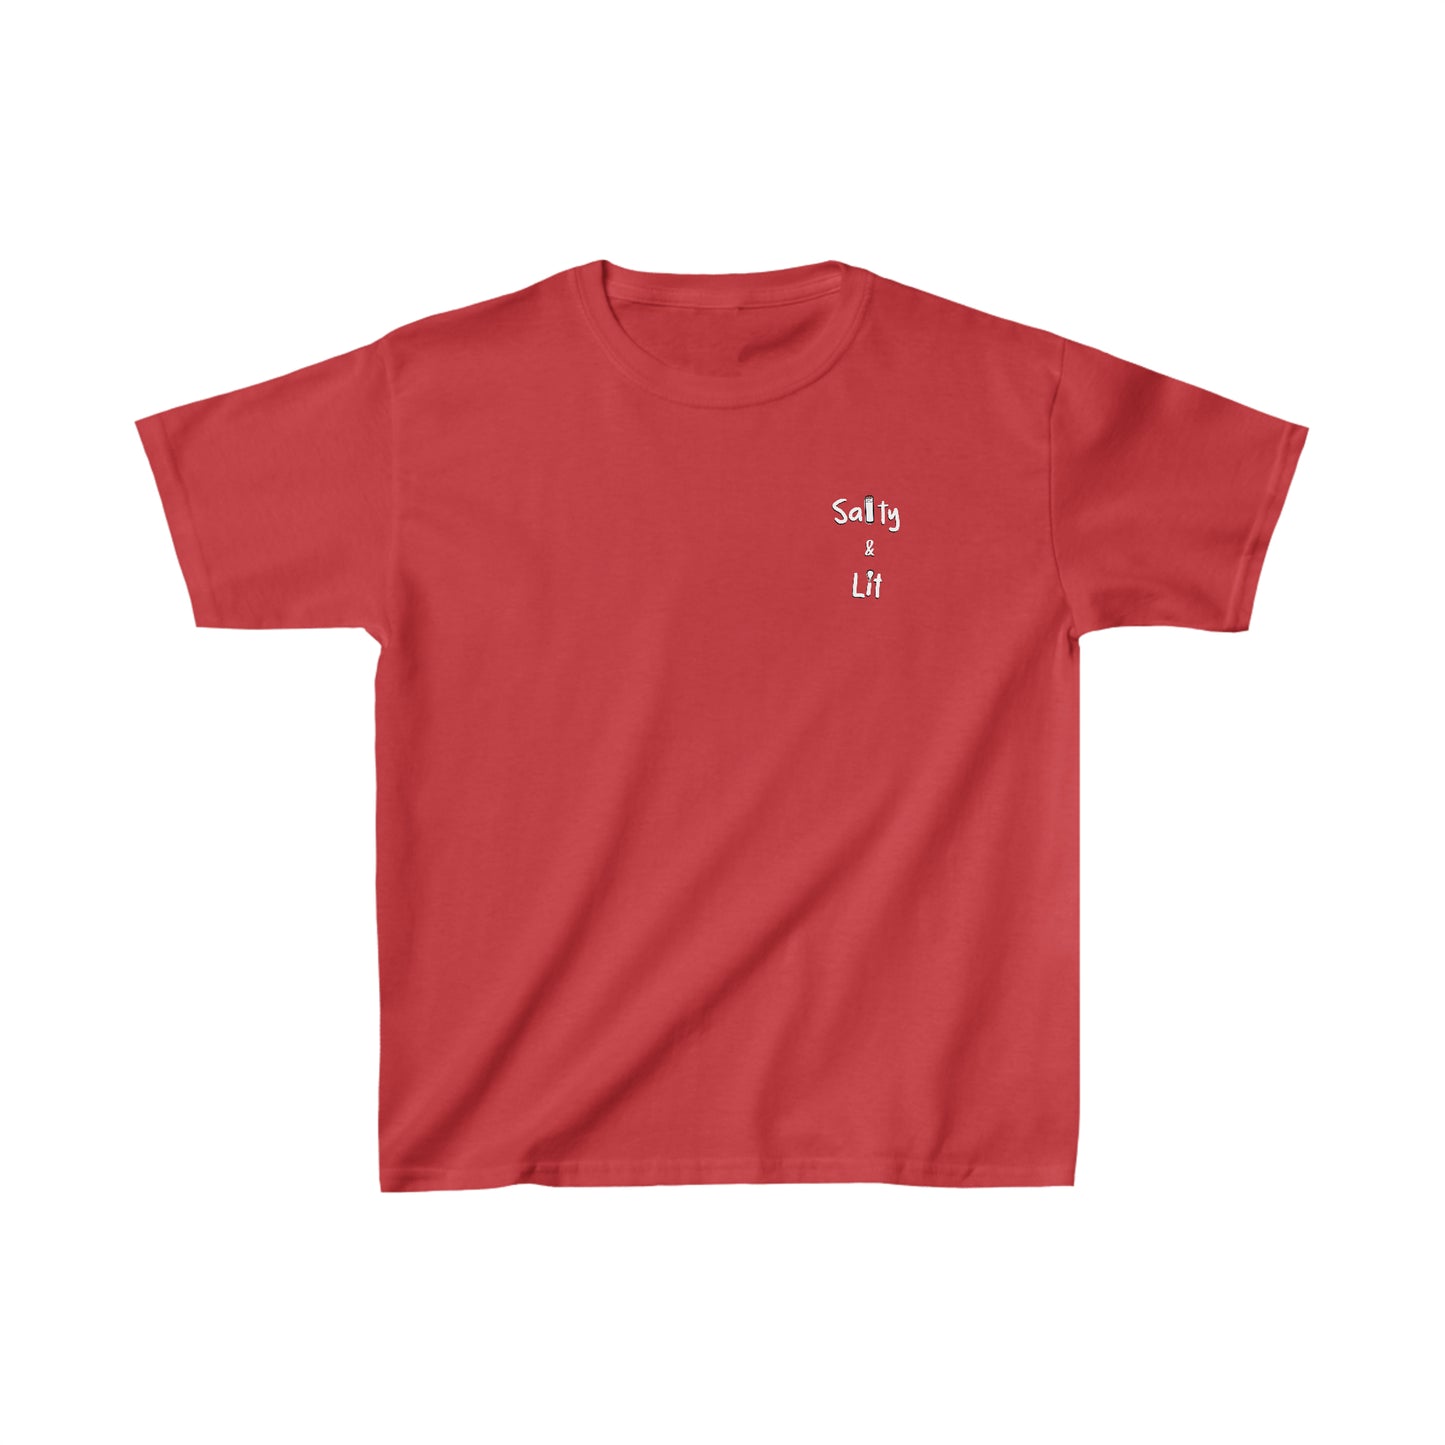 Salty & Lit- Youth Unisex (Available in more colors)